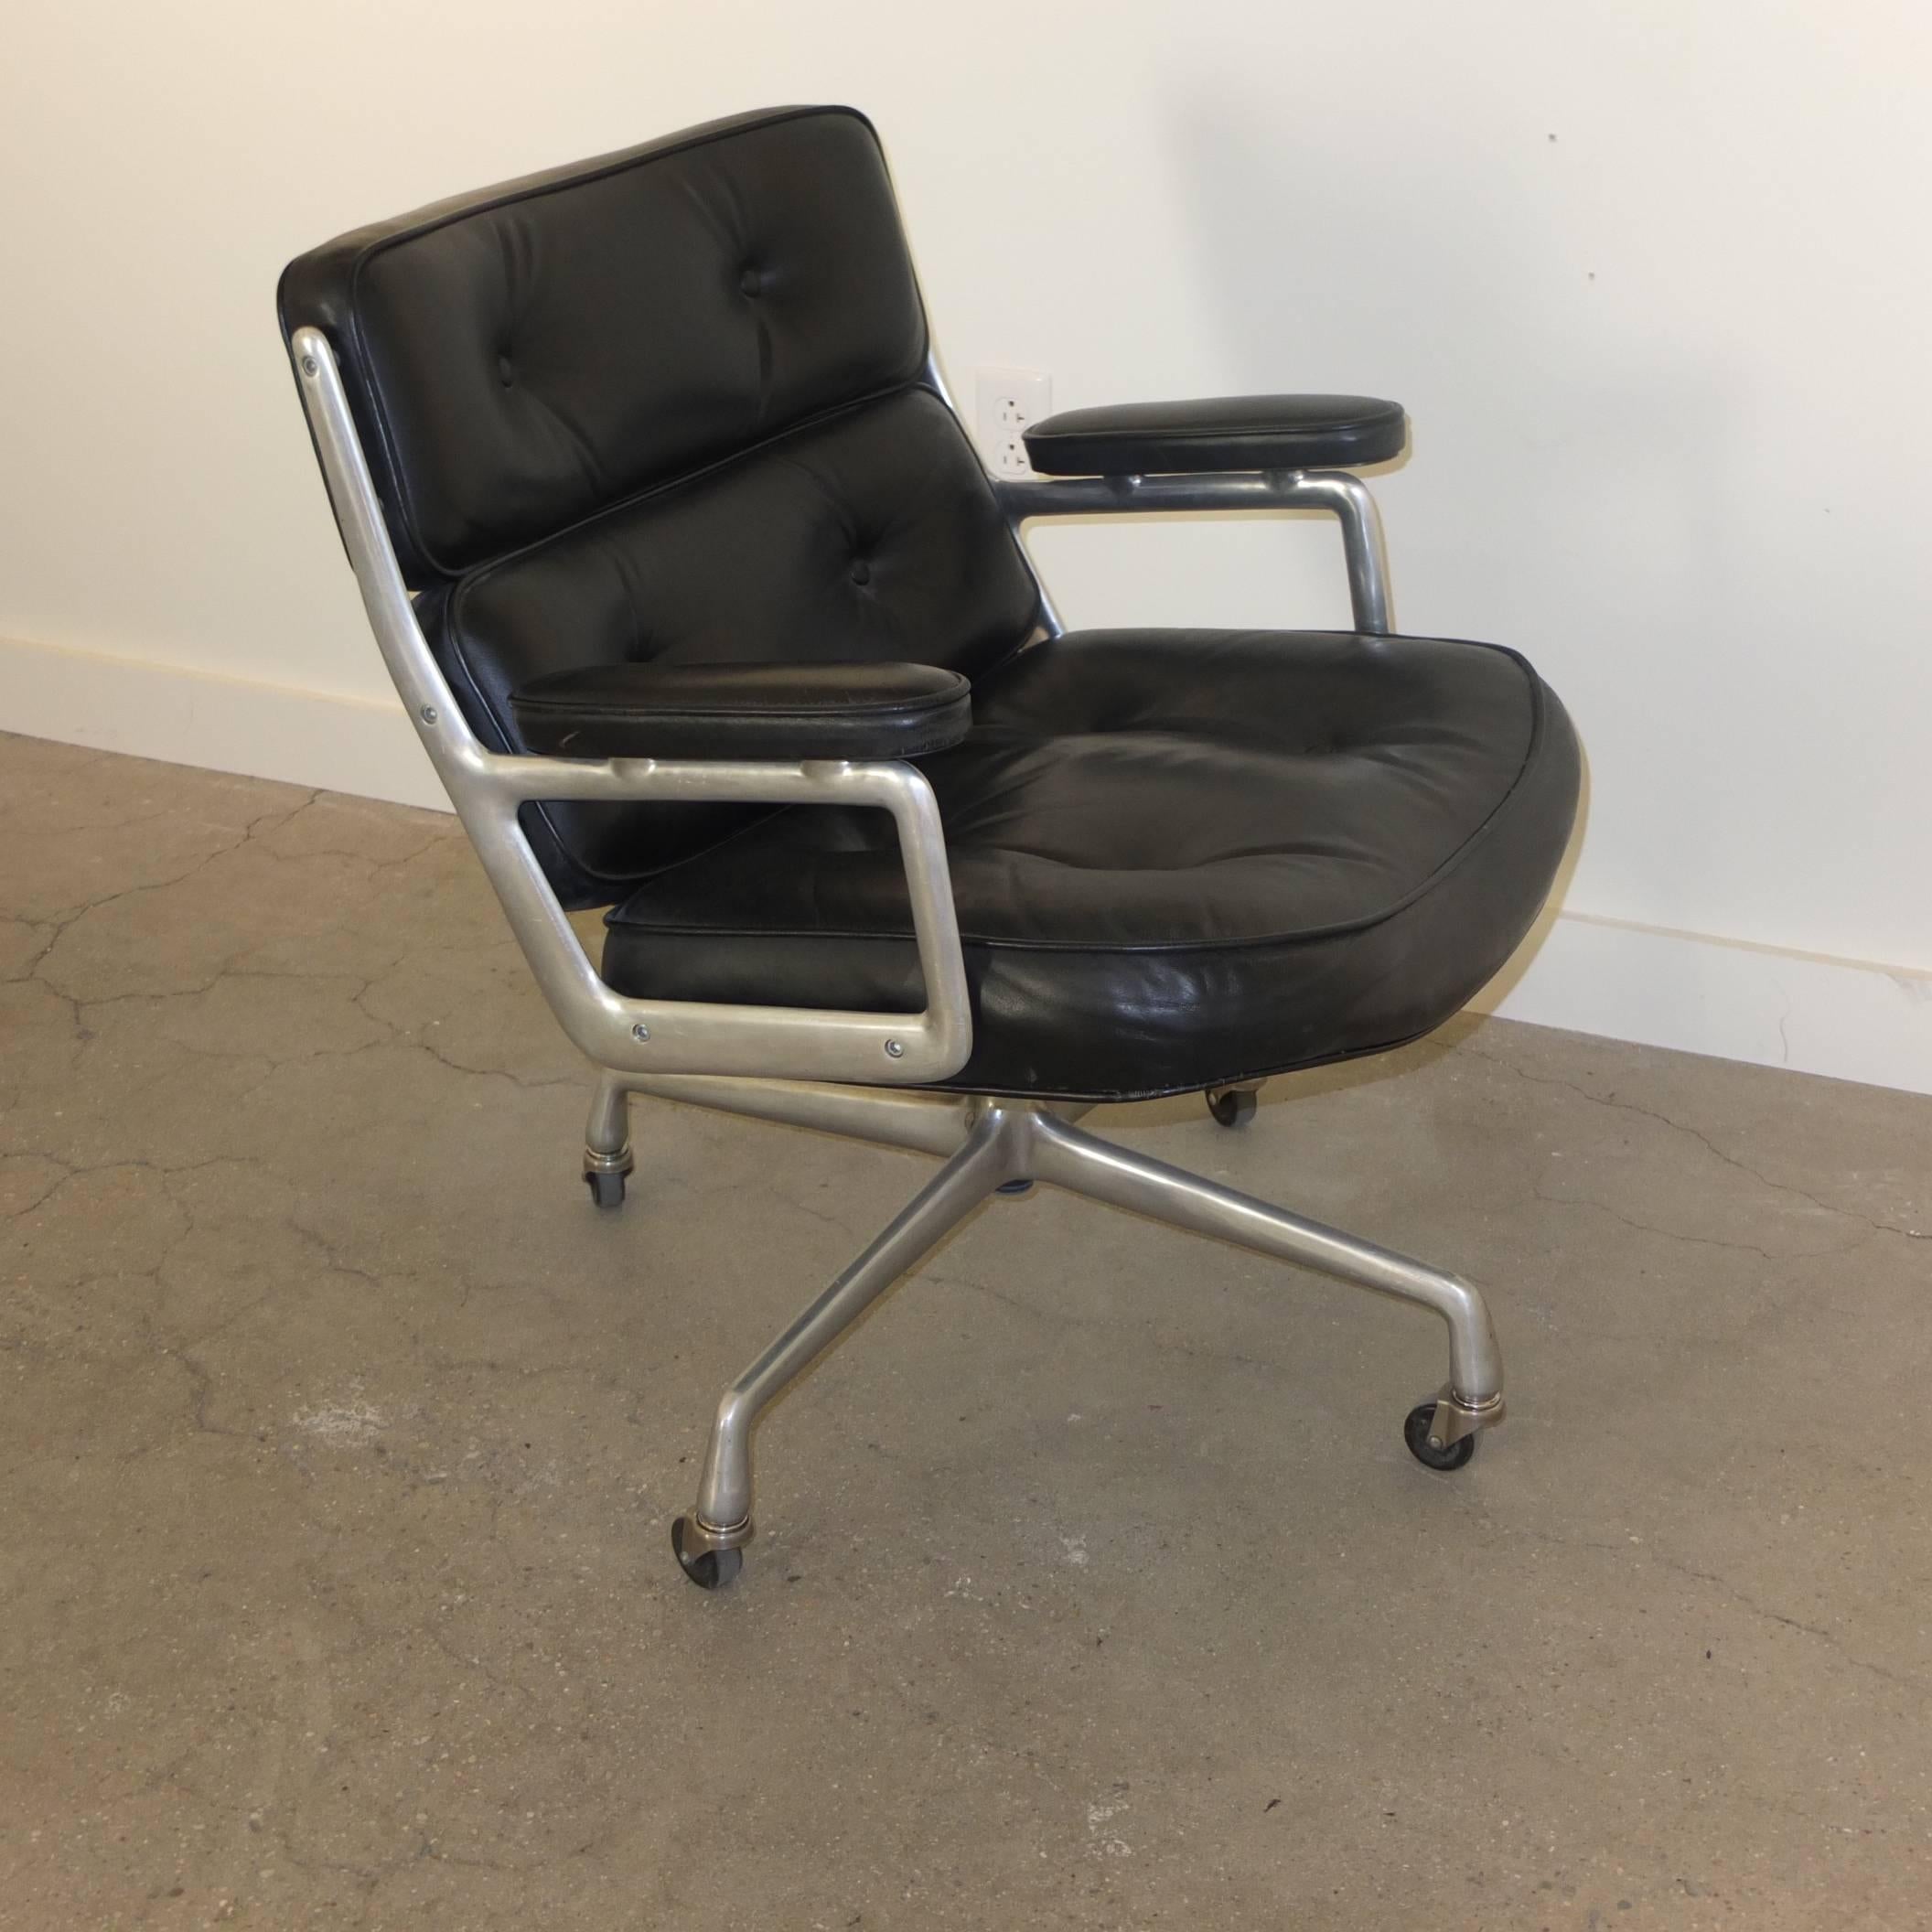 Aluminum 1960s Time Life Lobby Chair by Charles Eames for Herman Miller